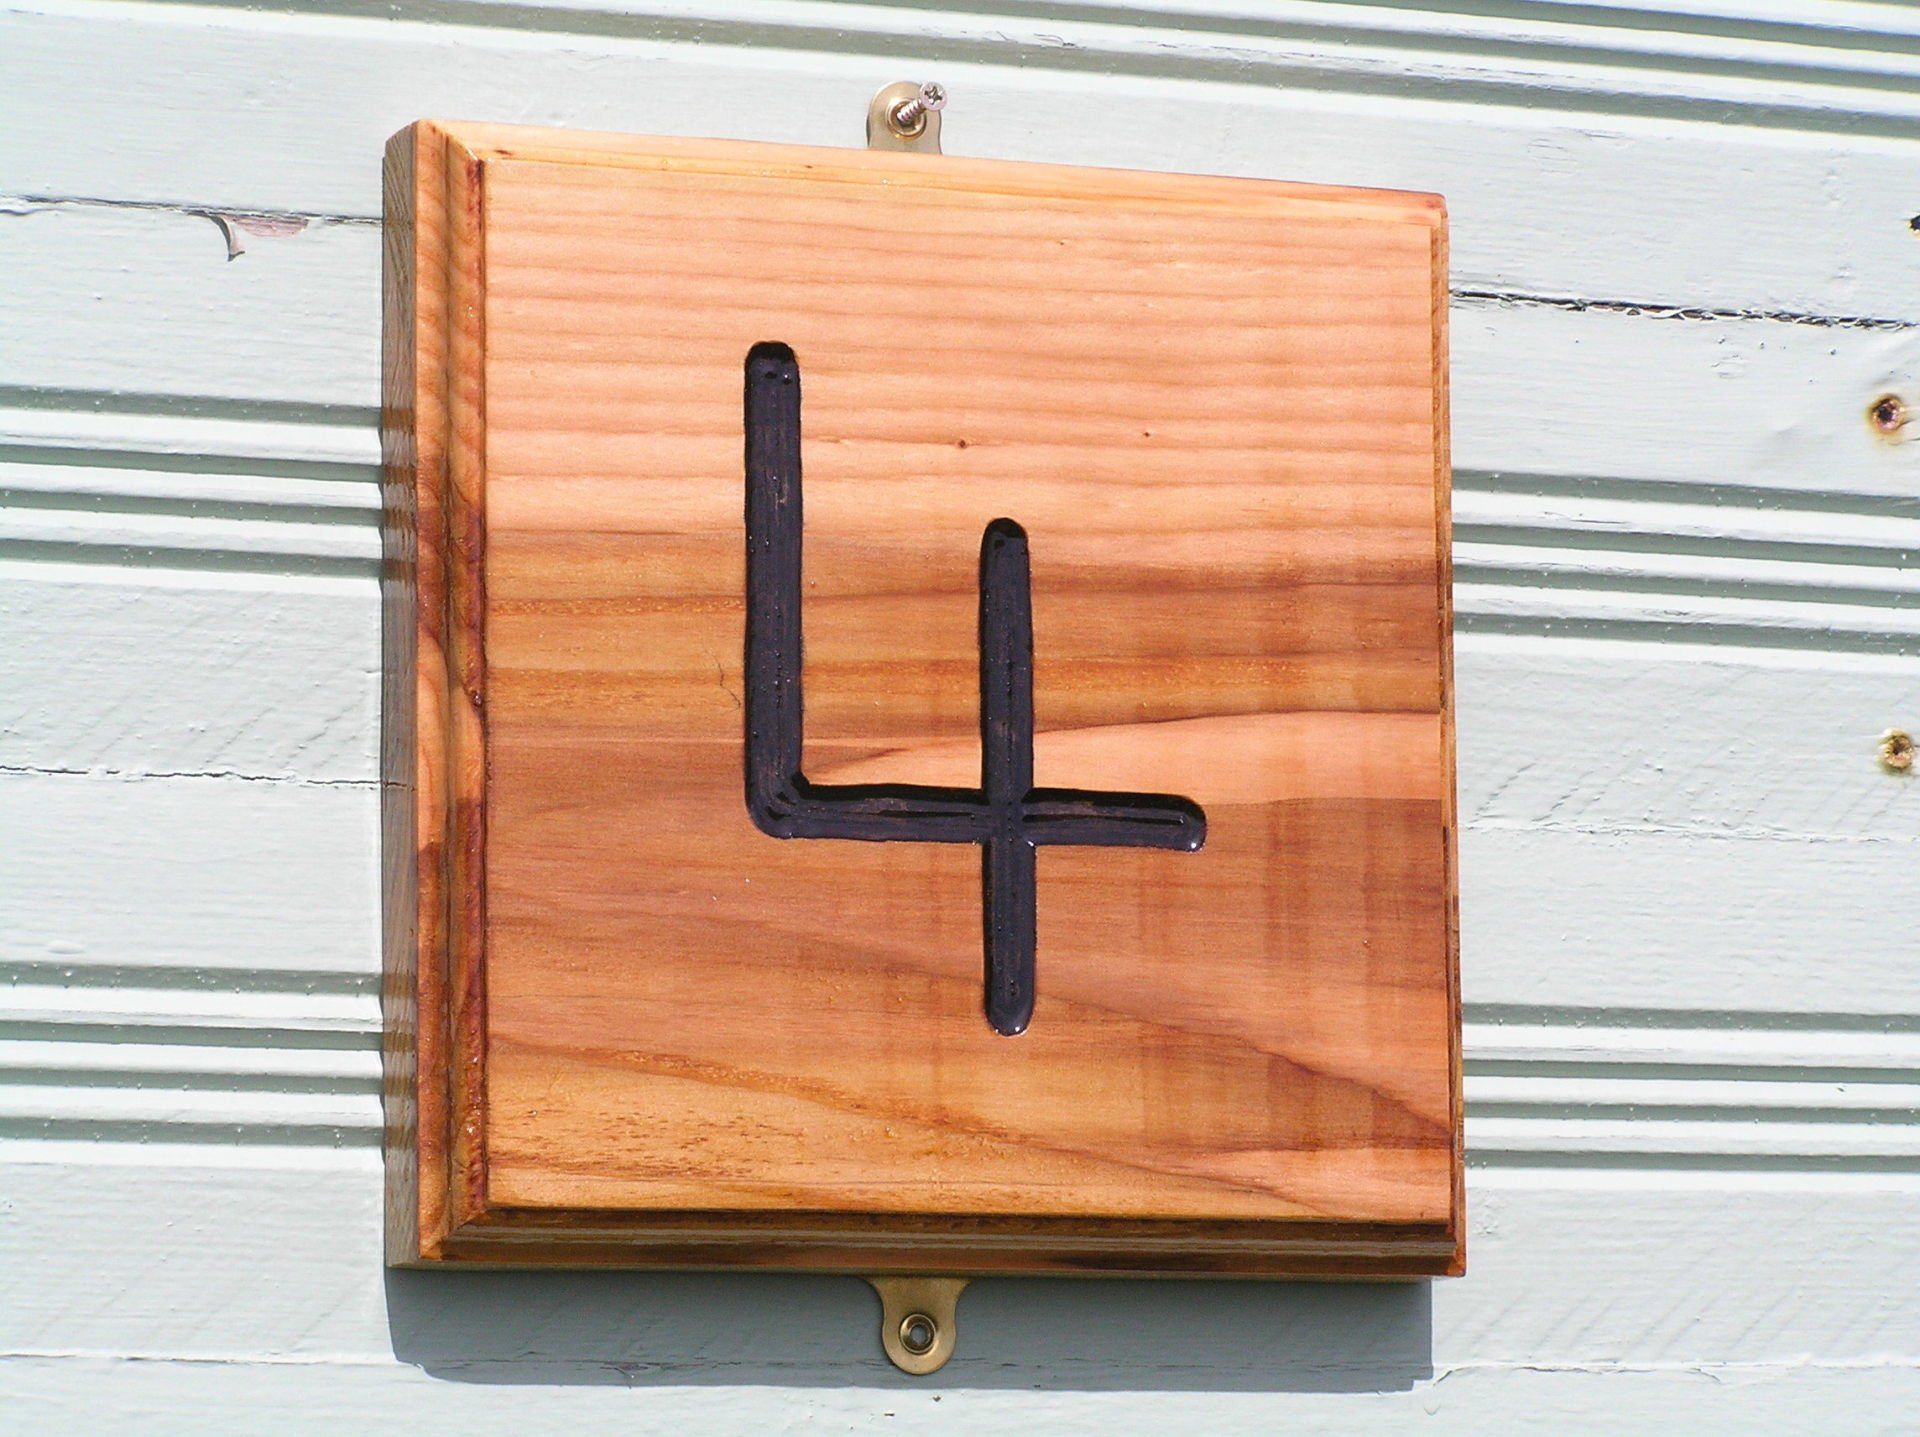 Wooden house number sign by Ingrained Culture